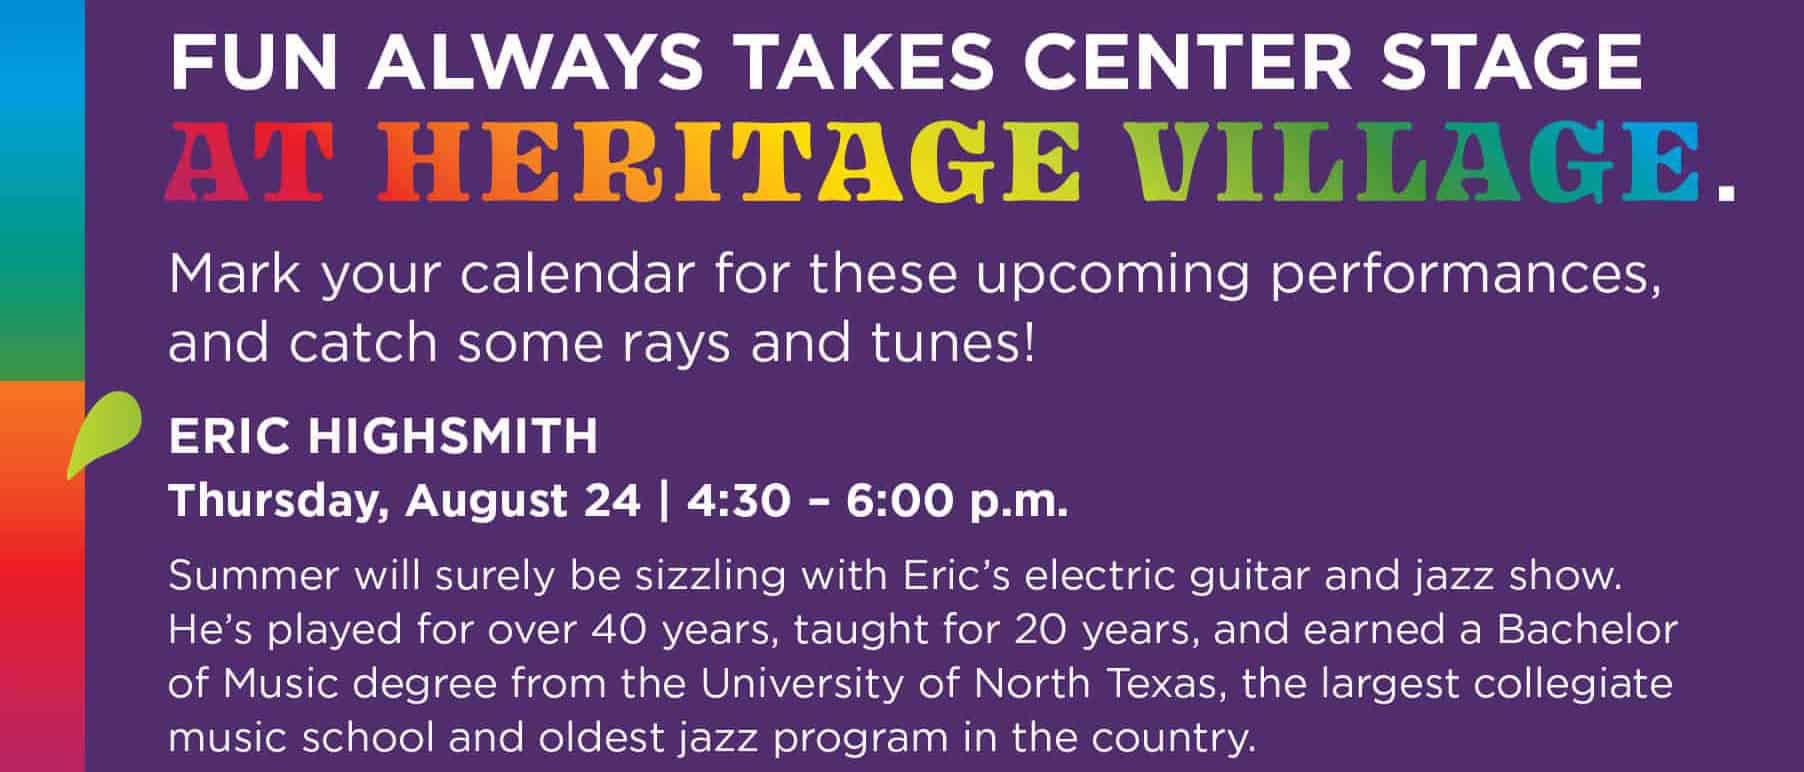 Promotional poster for Eric Highsmith performance at Heritage Village on August 24, 4:30-6 p.m.